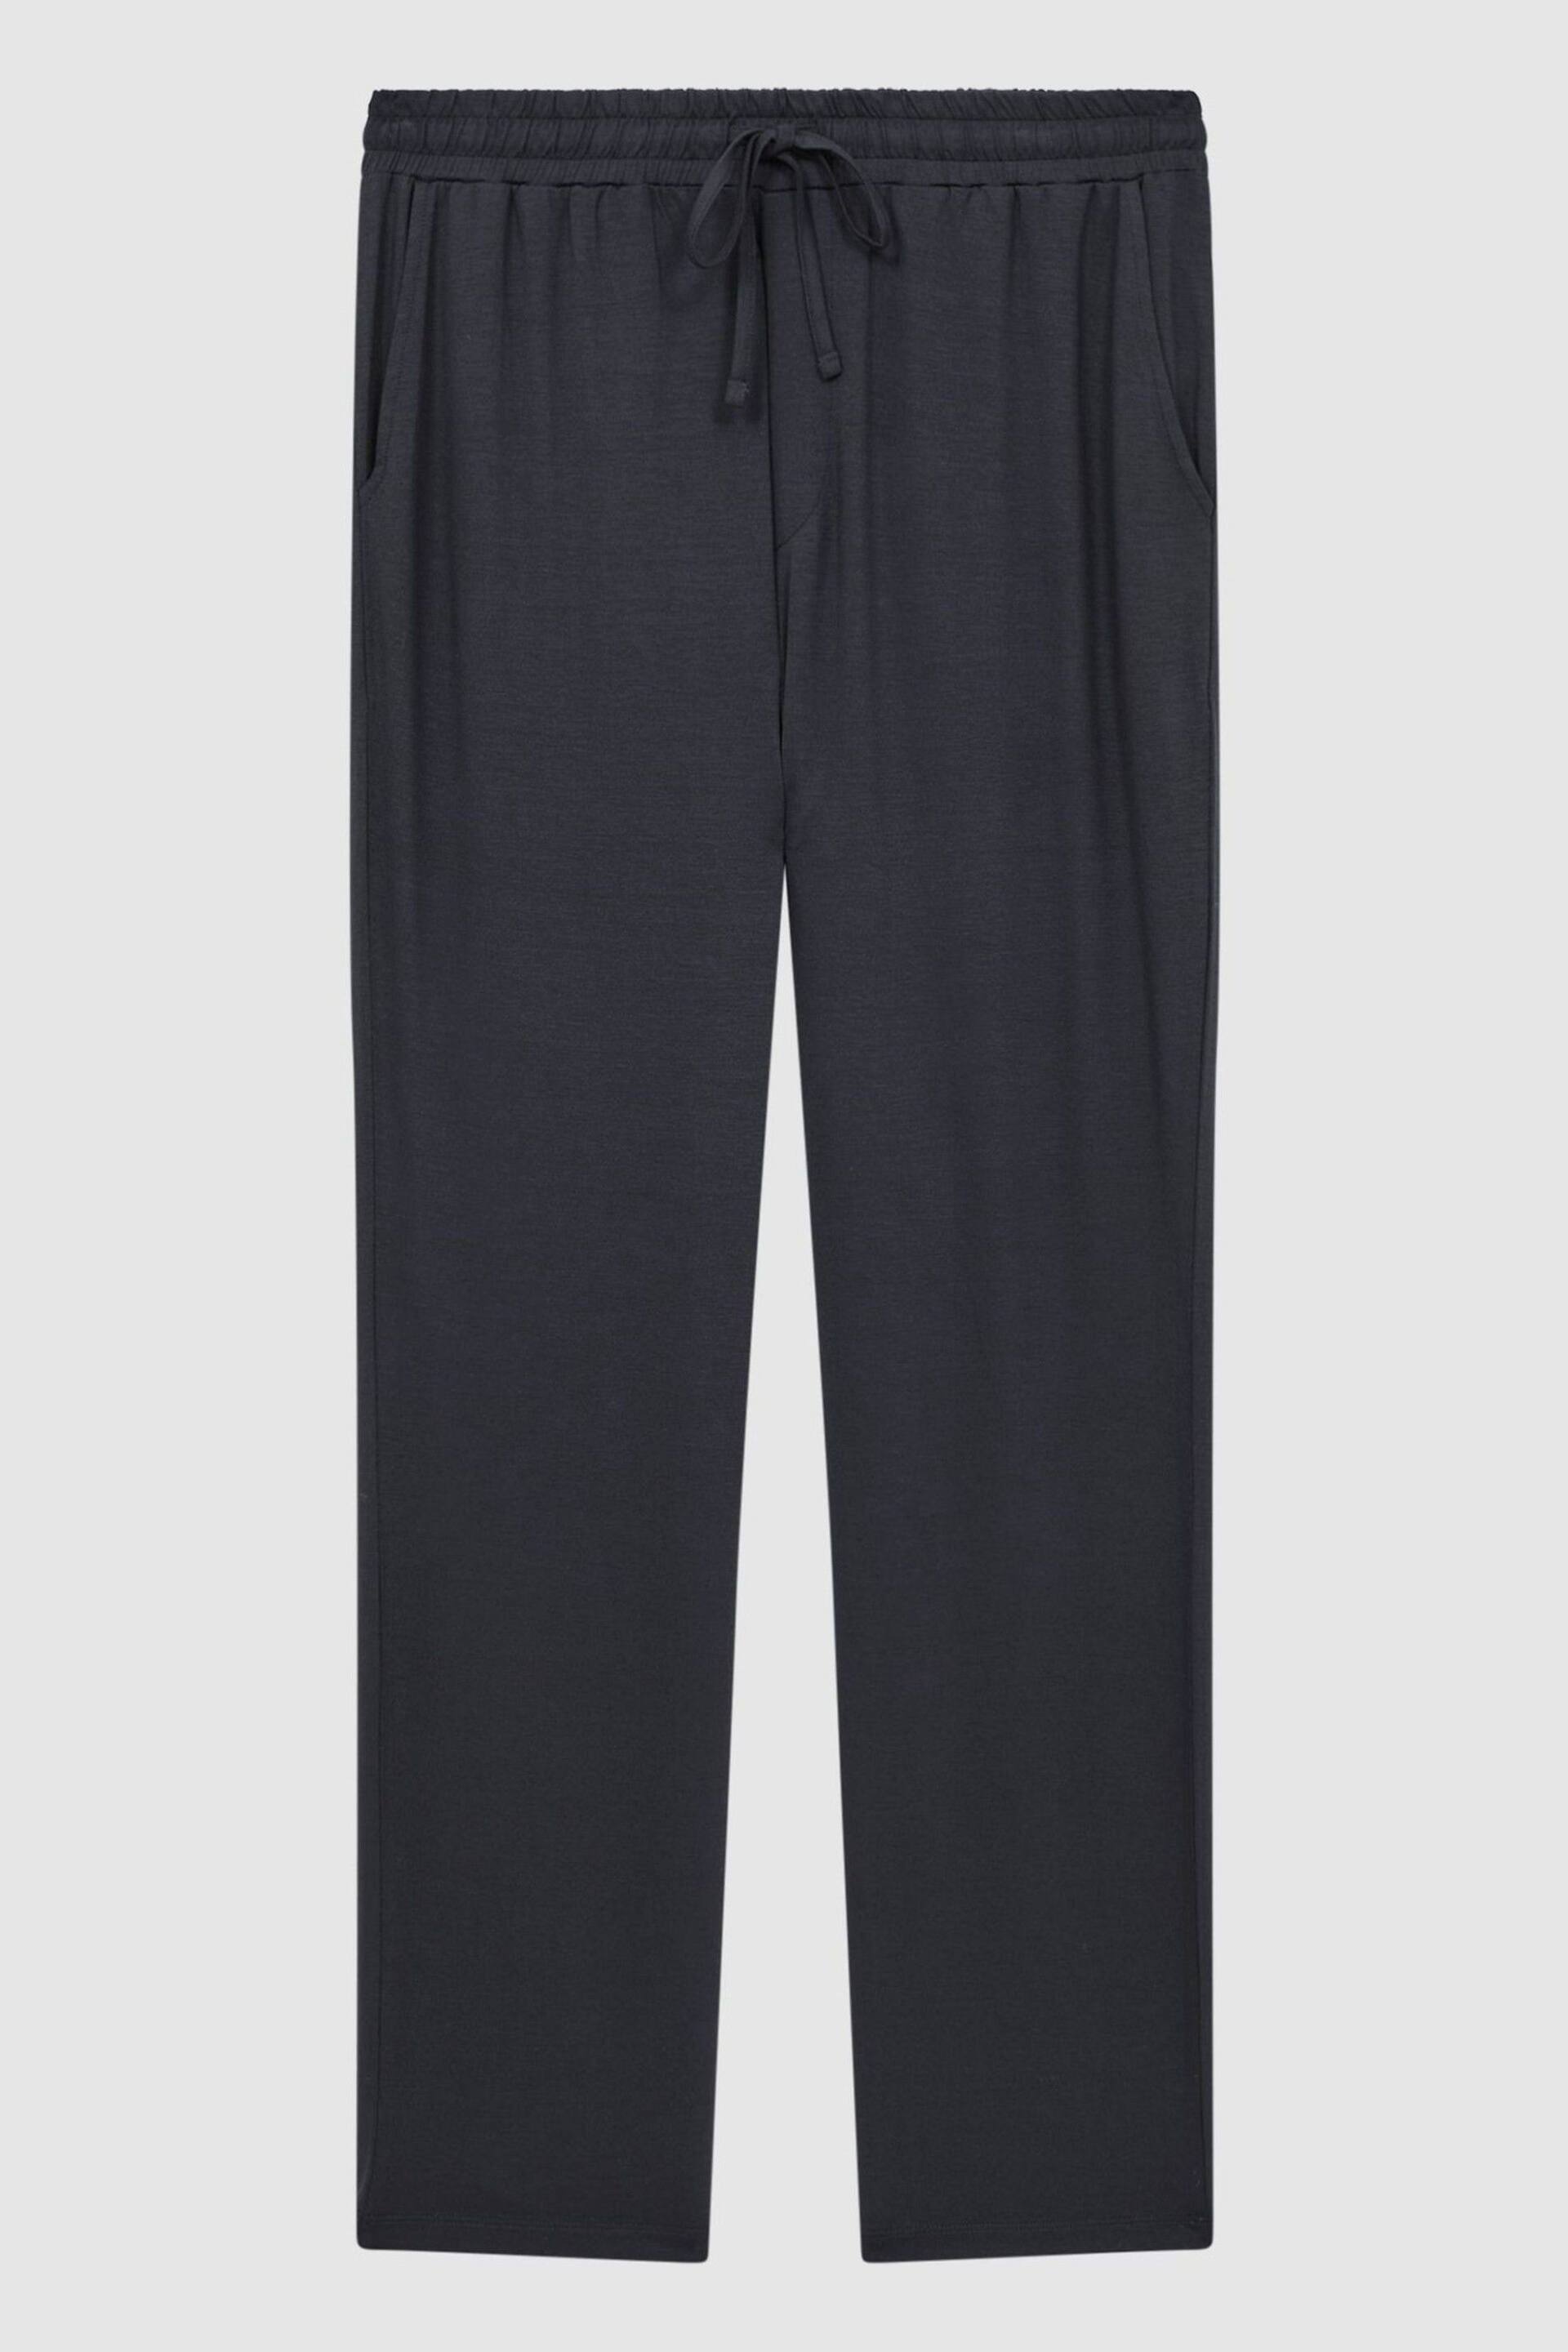 Reiss Charcoal Norfolk Jersey Drawstring Joggers - Image 2 of 5